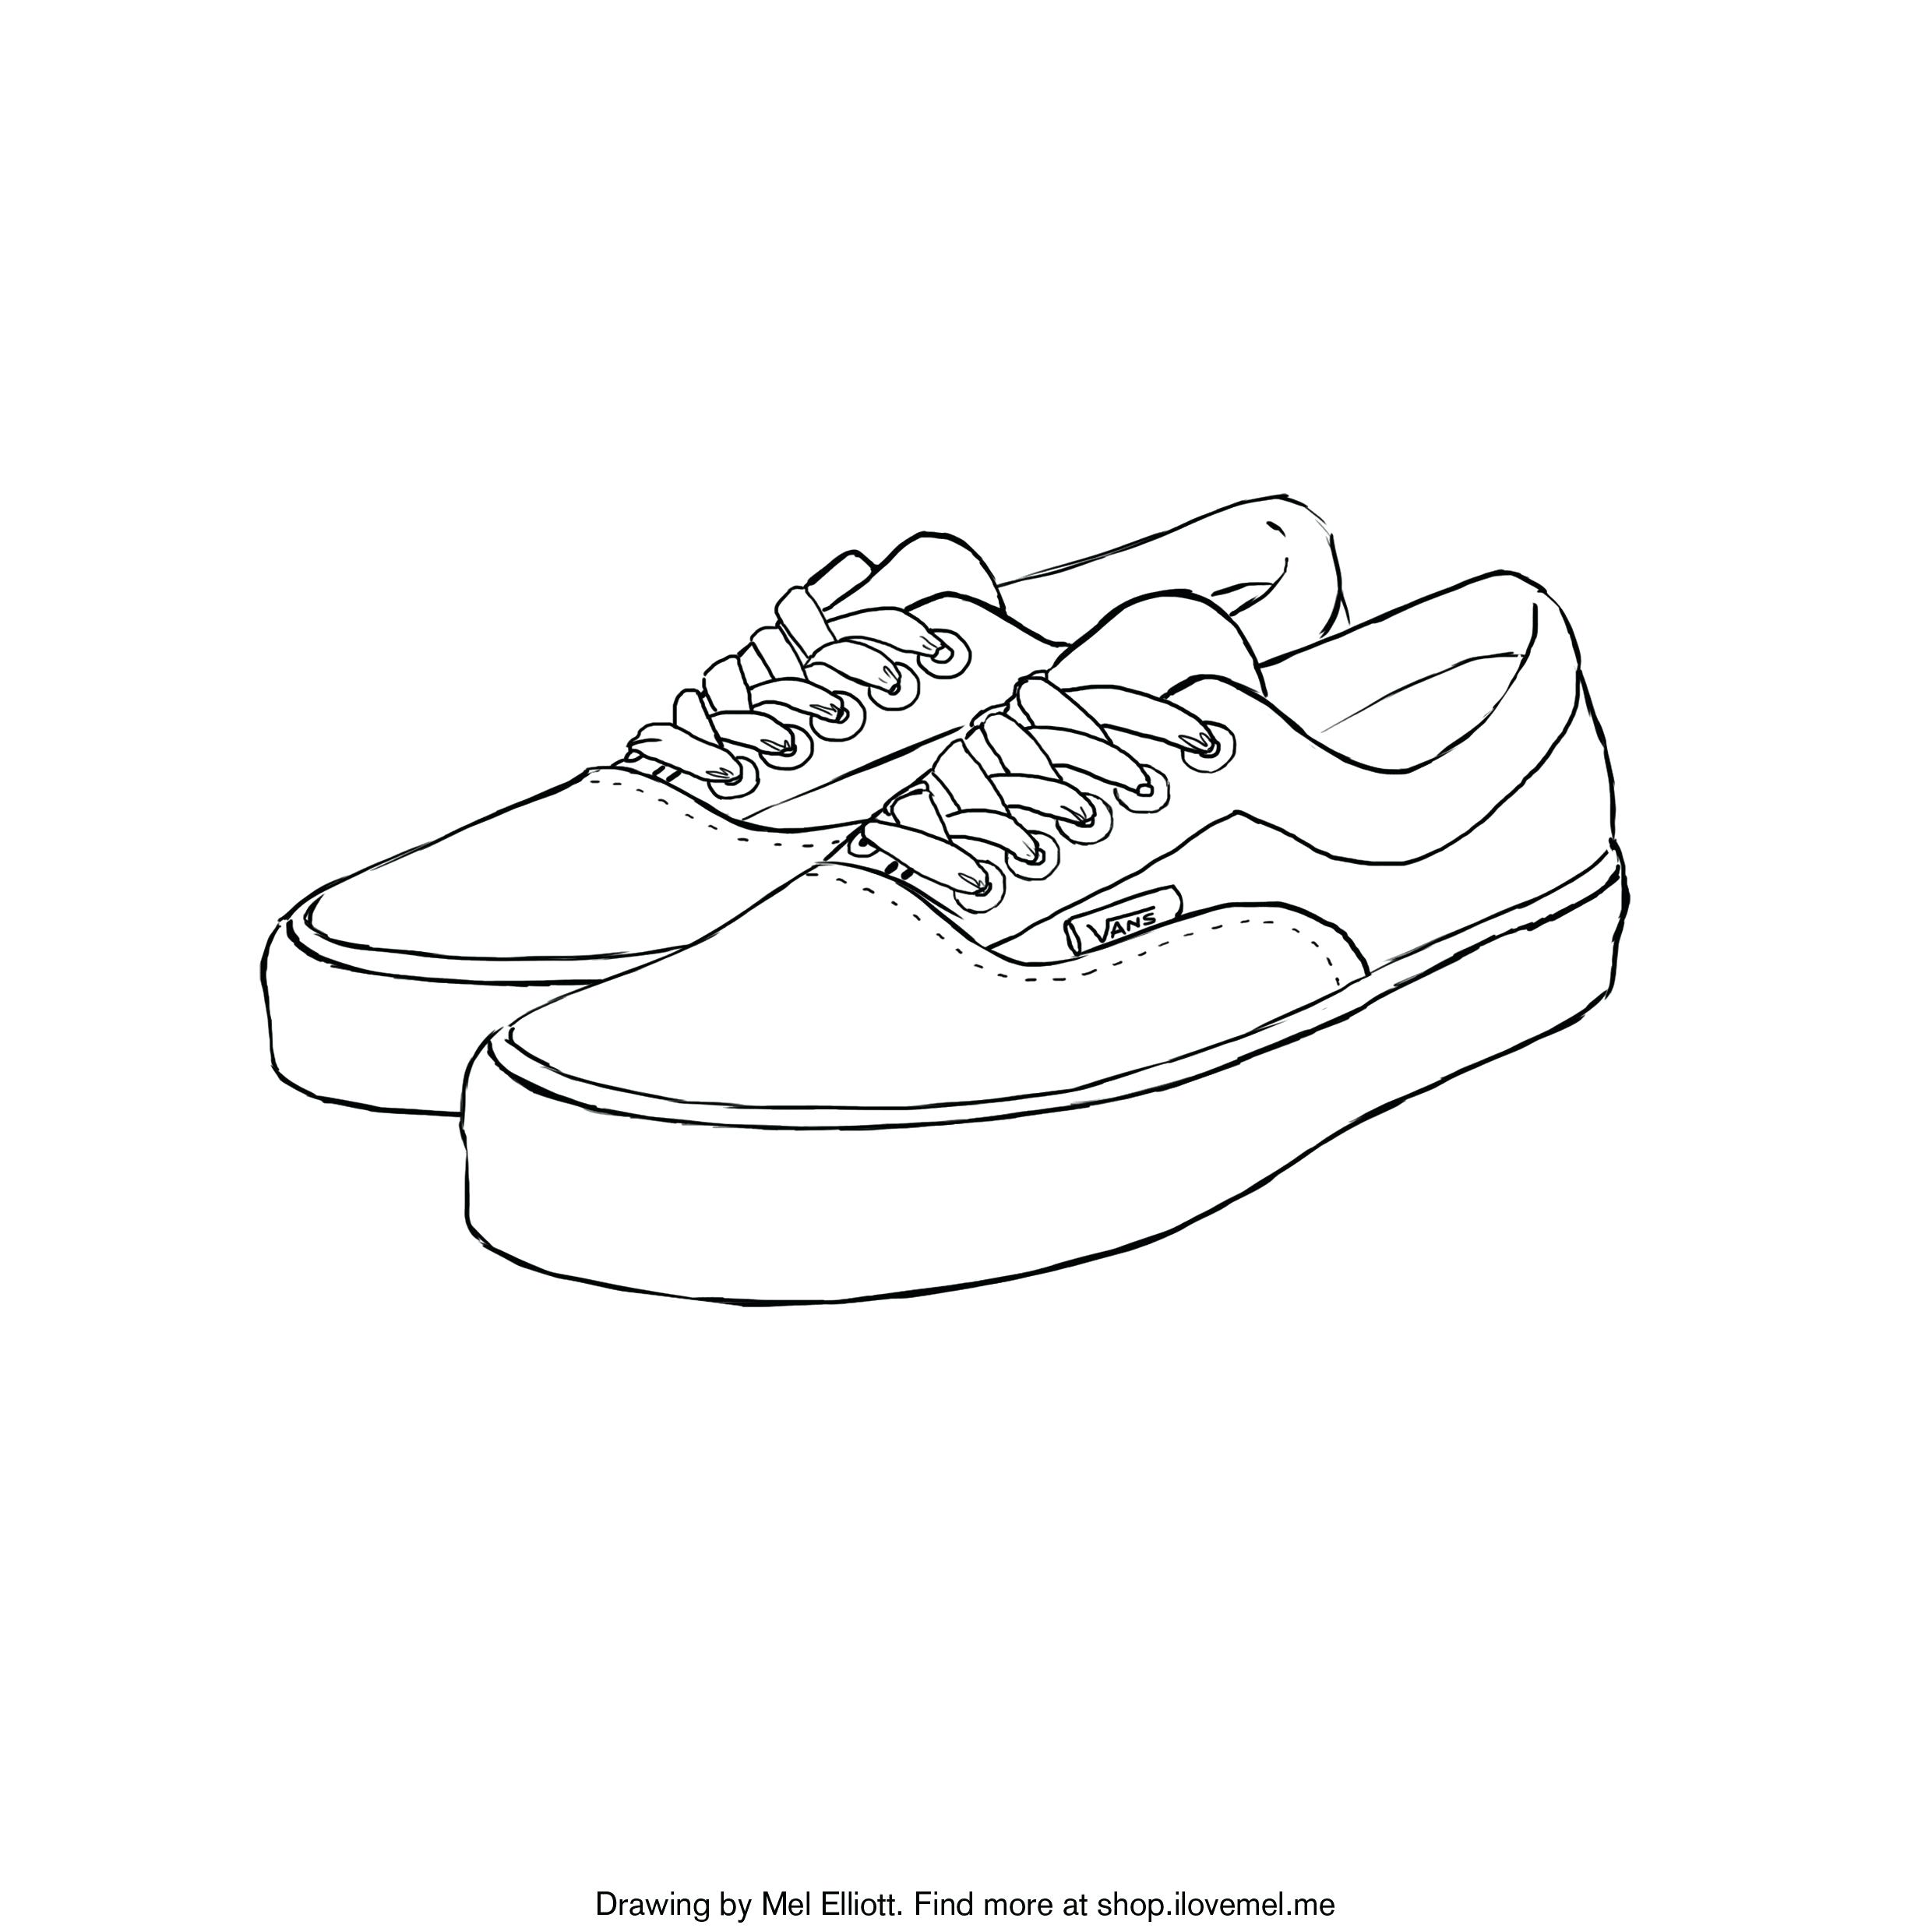 Vans Checkered Shoes Coloring Pages